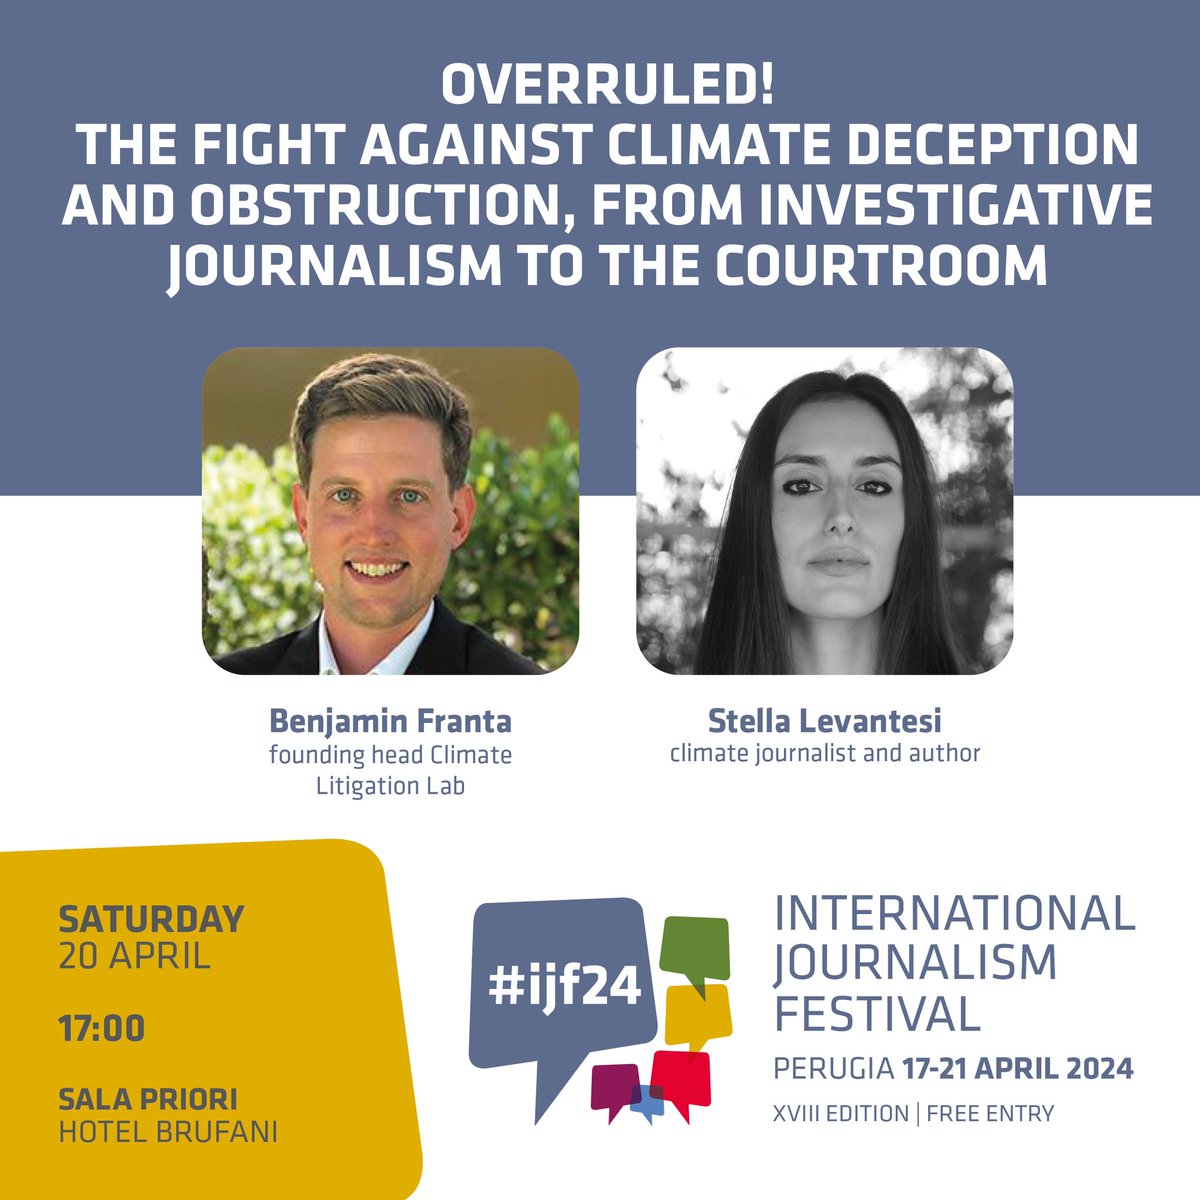 🔴 SAVE THE DATE! 'Overruled! The fight against climate deception and obstruction, from investigative journalism to the courtroom'. #ijf24 with @BenFranta @StellaLevantesi 🎥Live & On Demand > Sat, 20 Apr journalismfestival.com/programme/2024…